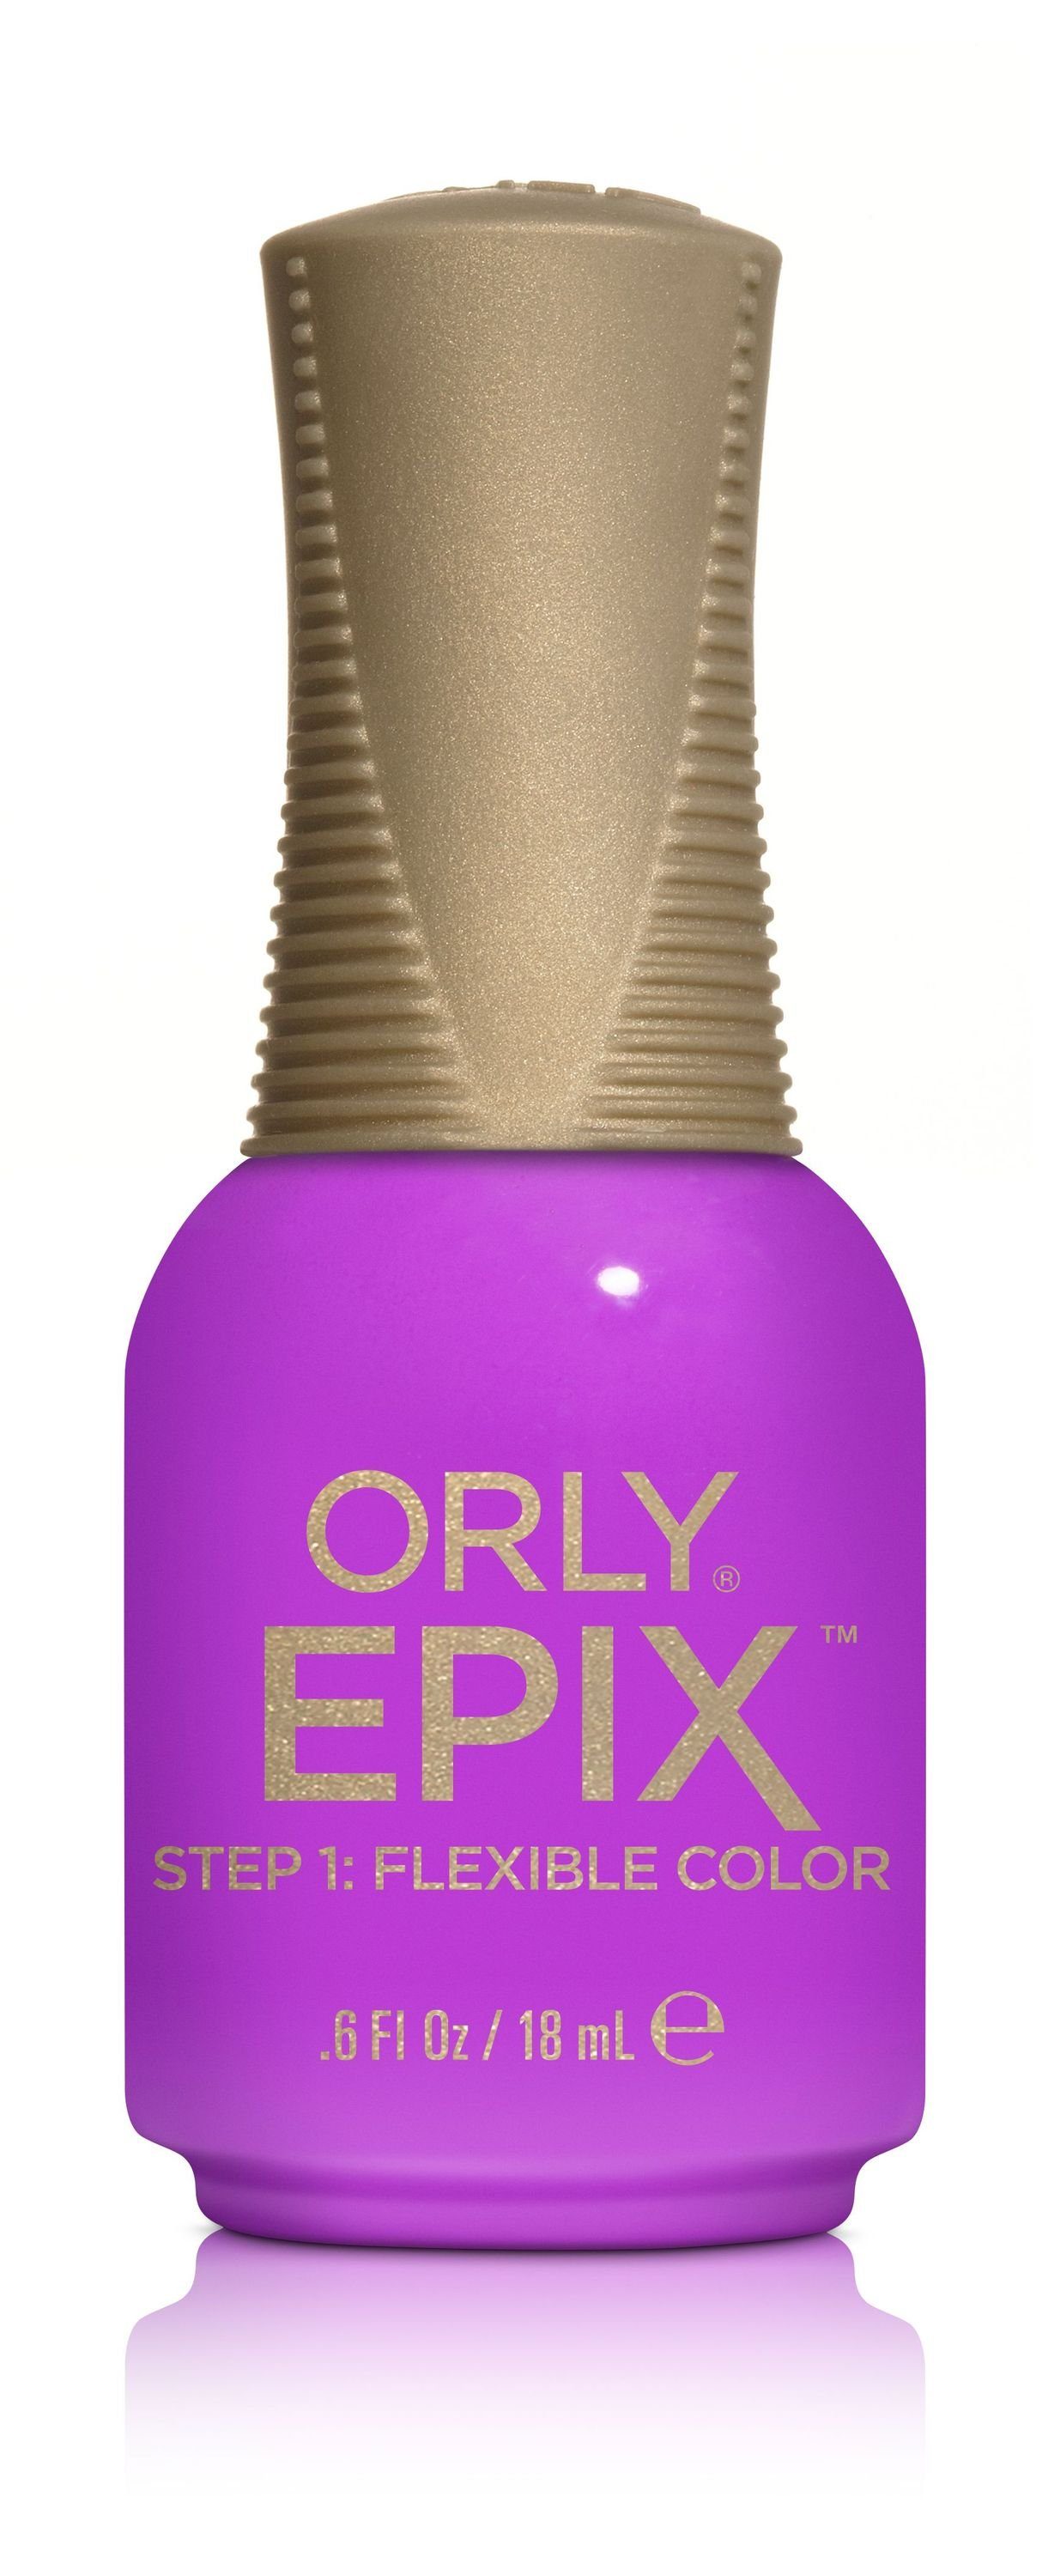 ORLY Nagellack ORLY - EPIX Flexible Color - Such A Critic, 18 ML